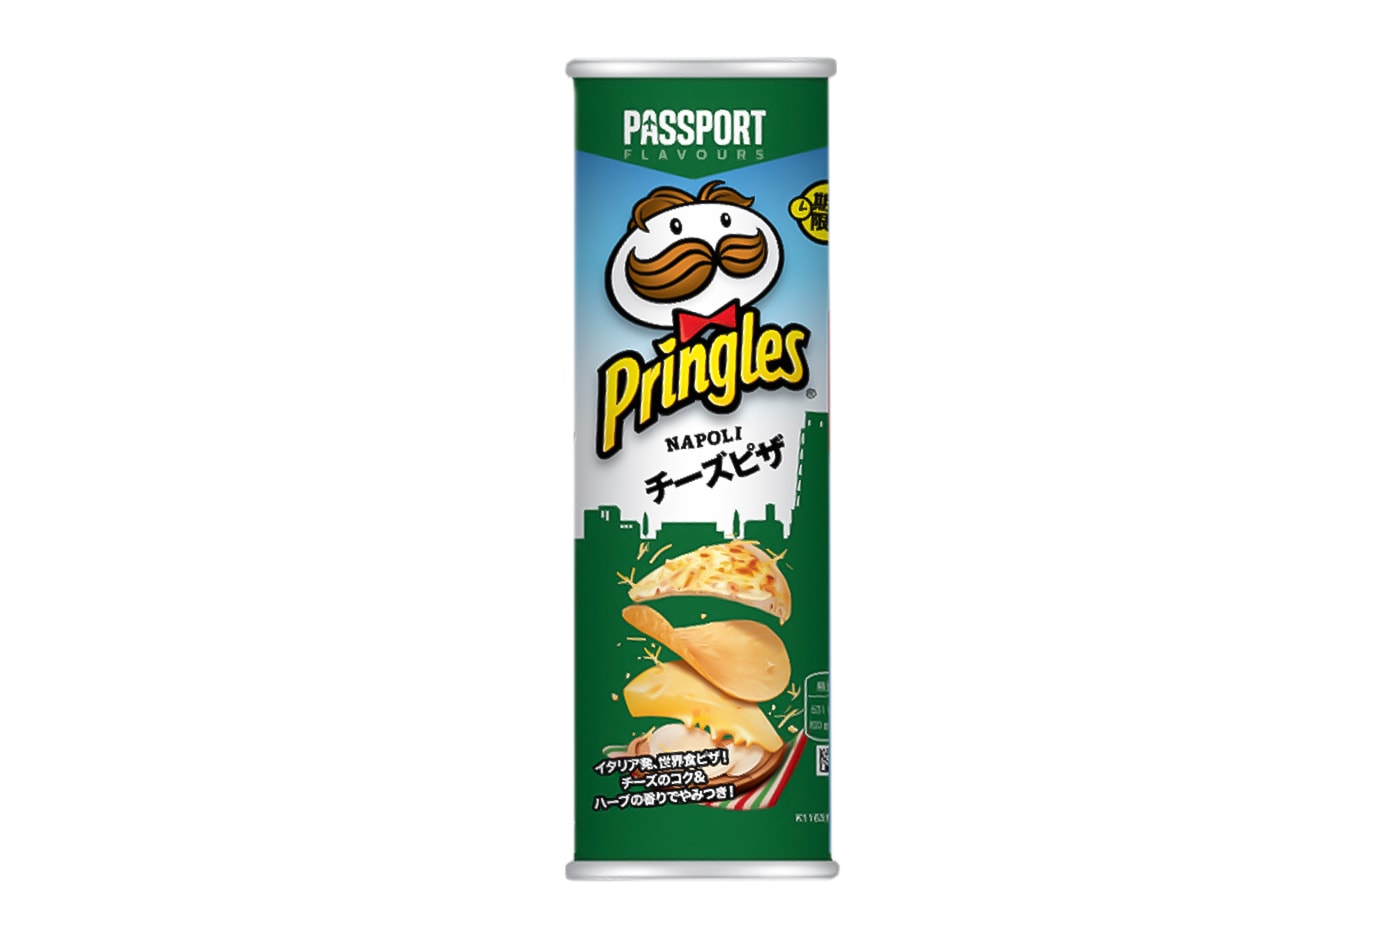 Pringles Japan Passport NAPOLI Cheese Pizza Release Leaning Tower of Pisa chips snacks Japan pizza 